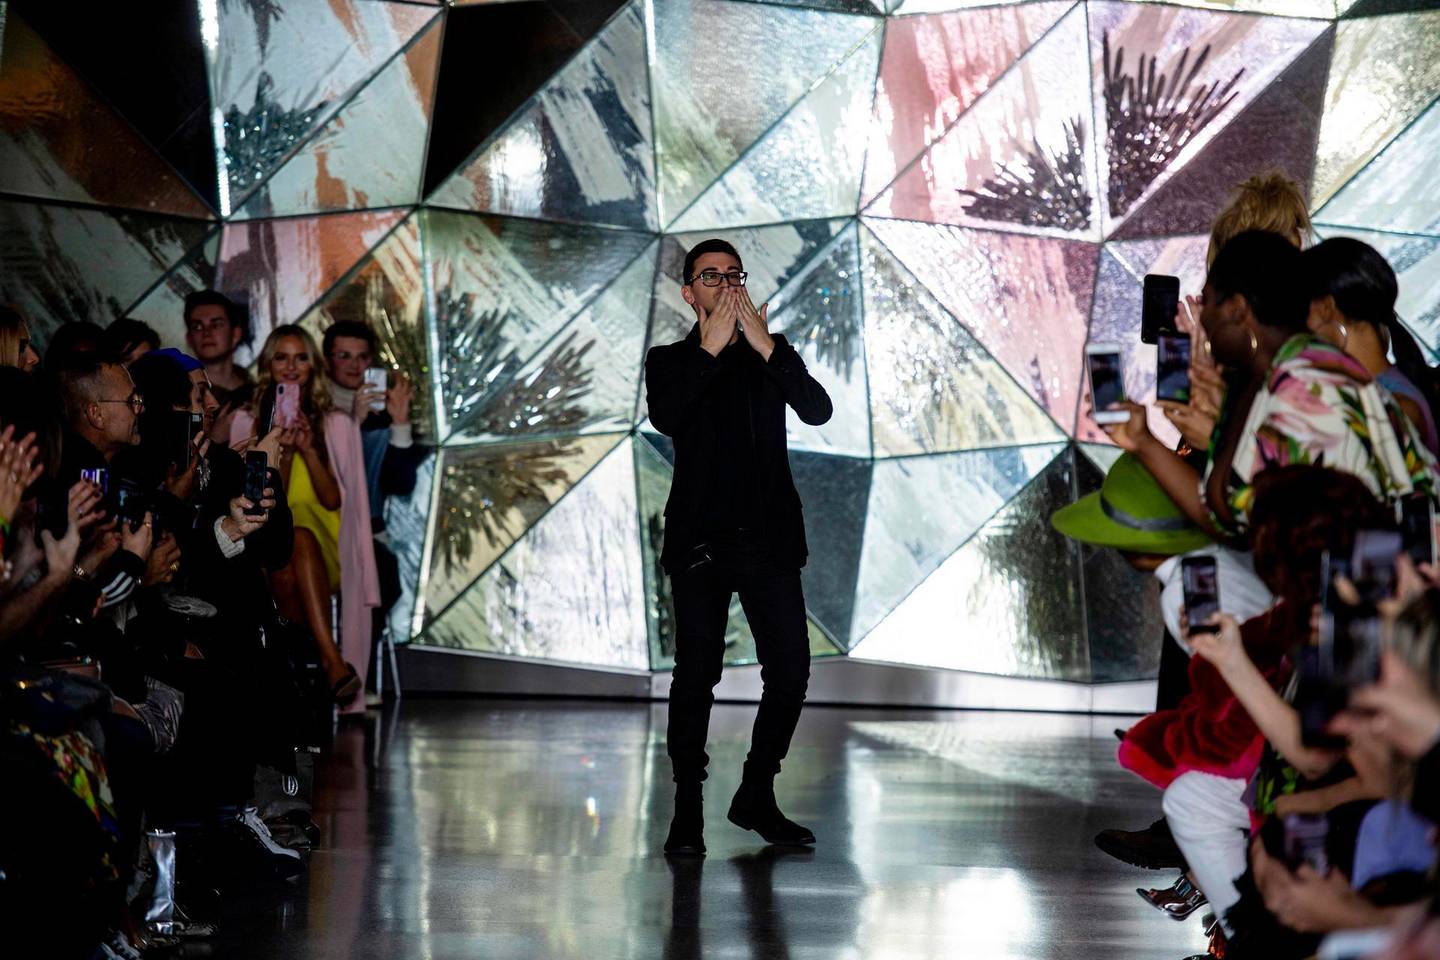 American fashion designer Christian Siriano acknowledges applause at the conclusion of his presentation during New York Fashion Week on February 9, 2019 in New York City.  / AFP / Johannes EISELE
